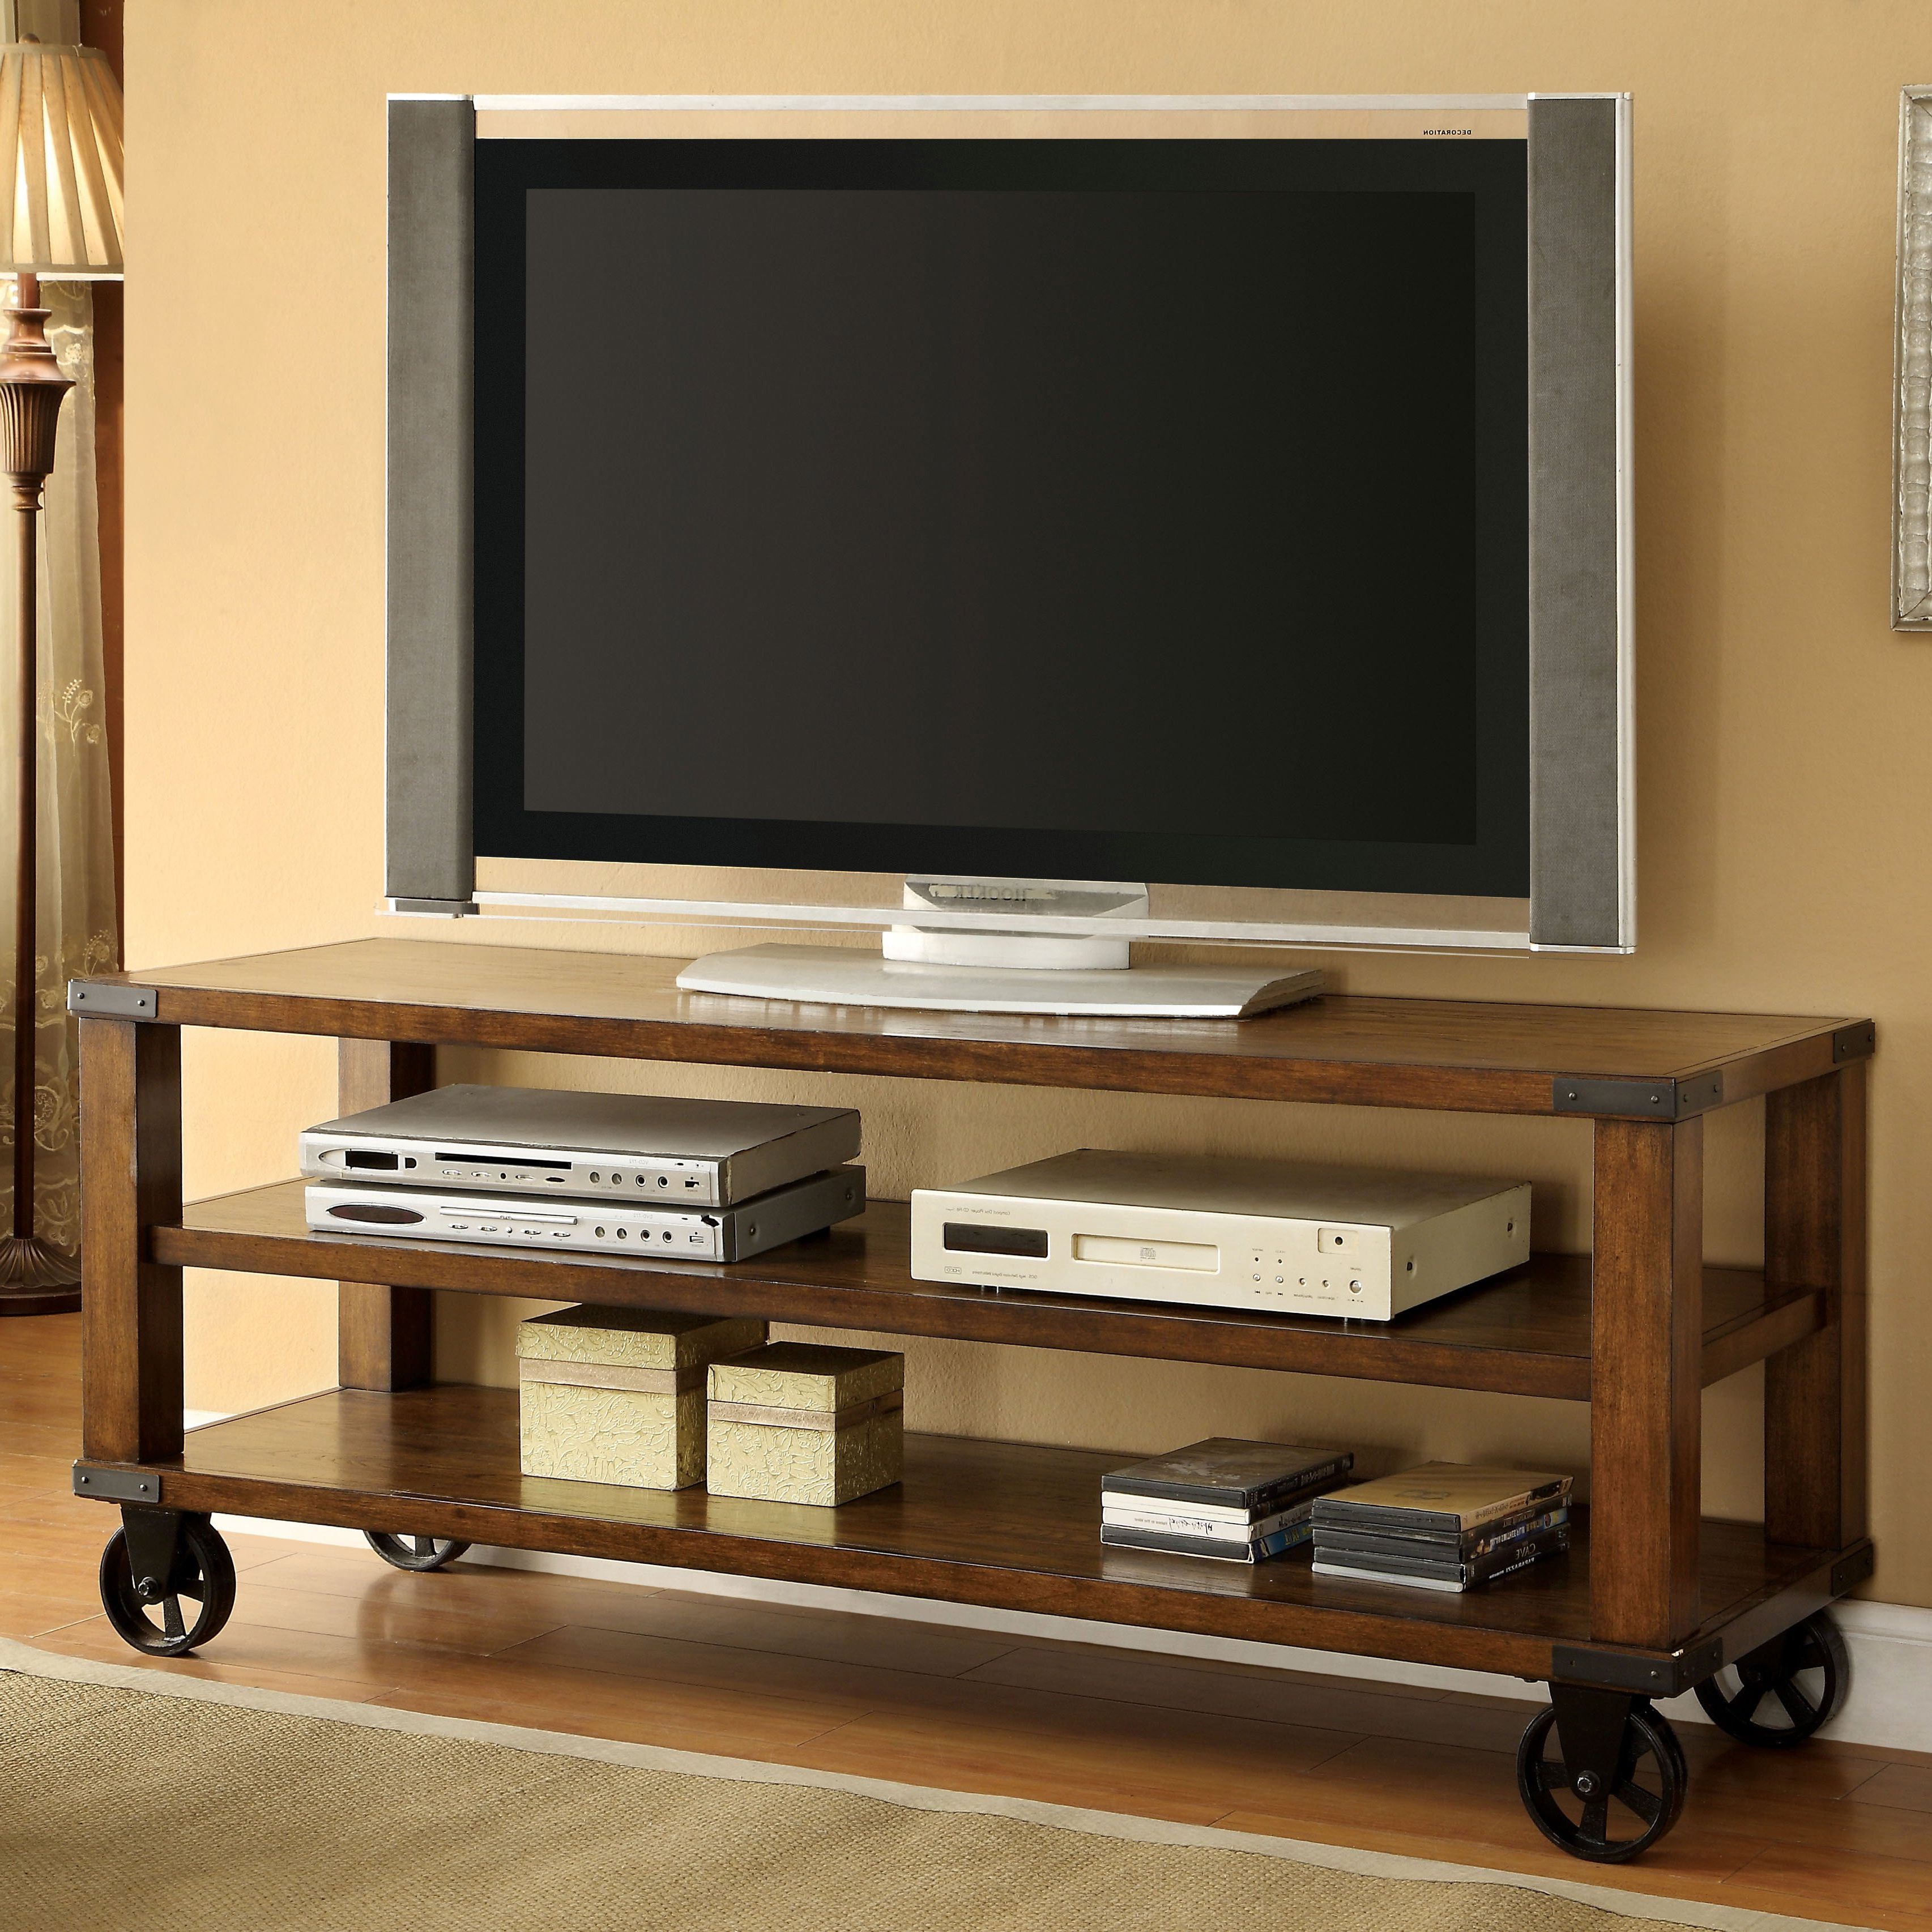 Como Tv Stands With Most Recent Shop Furniture Of America Royce Industrial 60 Inch Tv Stand – Free (View 17 of 20)